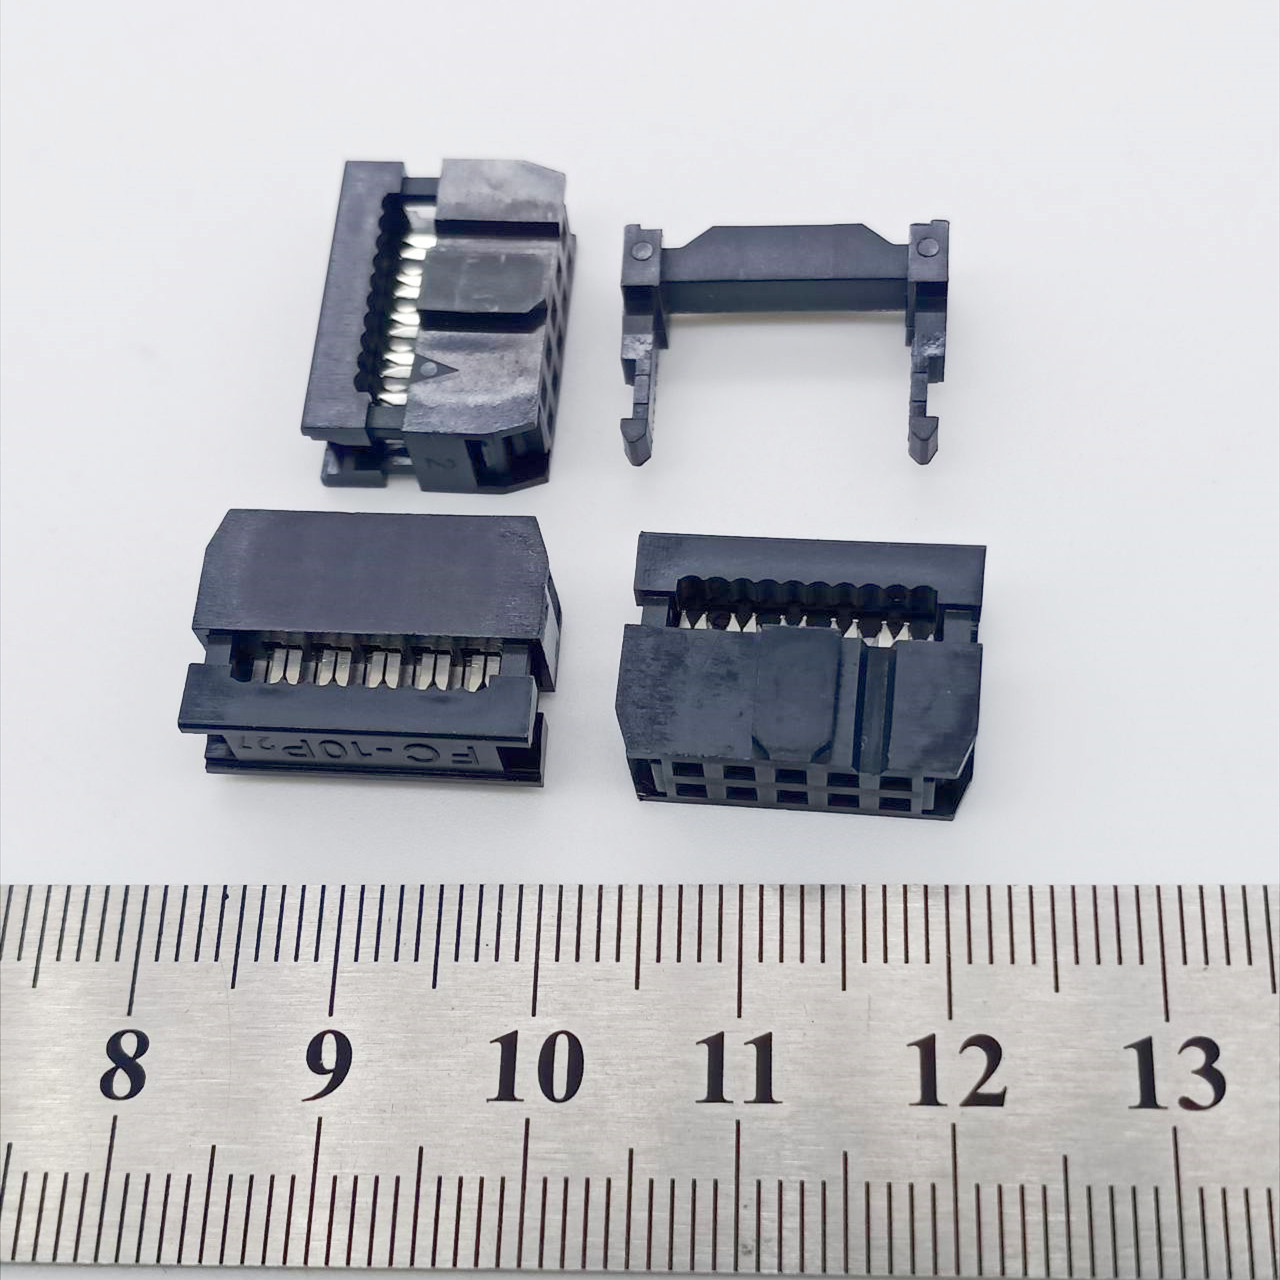 IDC CONNECTOR 2.54MM 10PIN WITH SR